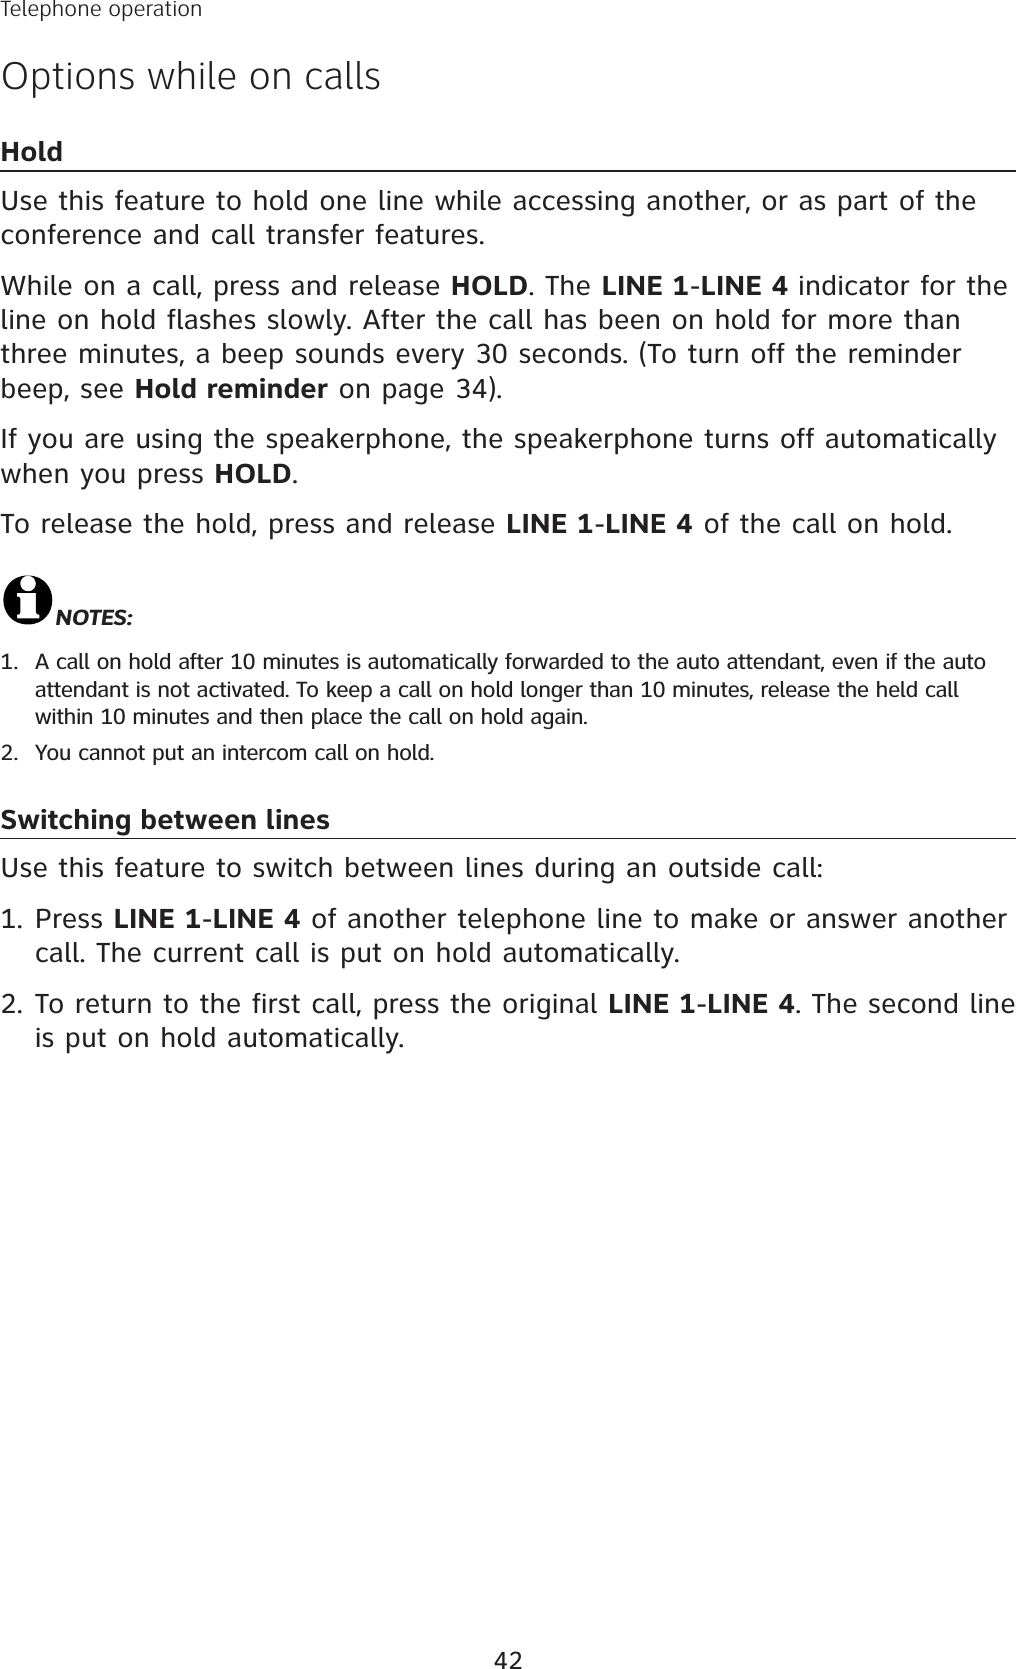 42Telephone operationOptions while on callsHoldUse this feature to hold one line while accessing another, or as part of the conference and call transfer features. While on a call, press and release HOLD. The LINE 1-LINE 4 indicator for the line on hold flashes slowly. After the call has been on hold for more than three minutes, a beep sounds every 30 seconds. (To turn off the reminder beep, see Hold reminder on page 34).If you are using the speakerphone, the speakerphone turns off automatically when you press HOLD.To release the hold, press and release LINE 1-LINE 4 of the call on hold.NOTES:A call on hold after 10 minutes is automatically forwarded to the auto attendant, even if the auto attendant is not activated. To keep a call on hold longer than 10 minutes, release the held call  within 10 minutes and then place the call on hold again.You cannot put an intercom call on hold.Switching between linesUse this feature to switch between lines during an outside call:Press LINE 1-LINE 4 of another telephone line to make or answer another call. The current call is put on hold automatically.To return to the first call, press the original LINE 1-LINE 4. The second line is put on hold automatically. 1.2.1.2.